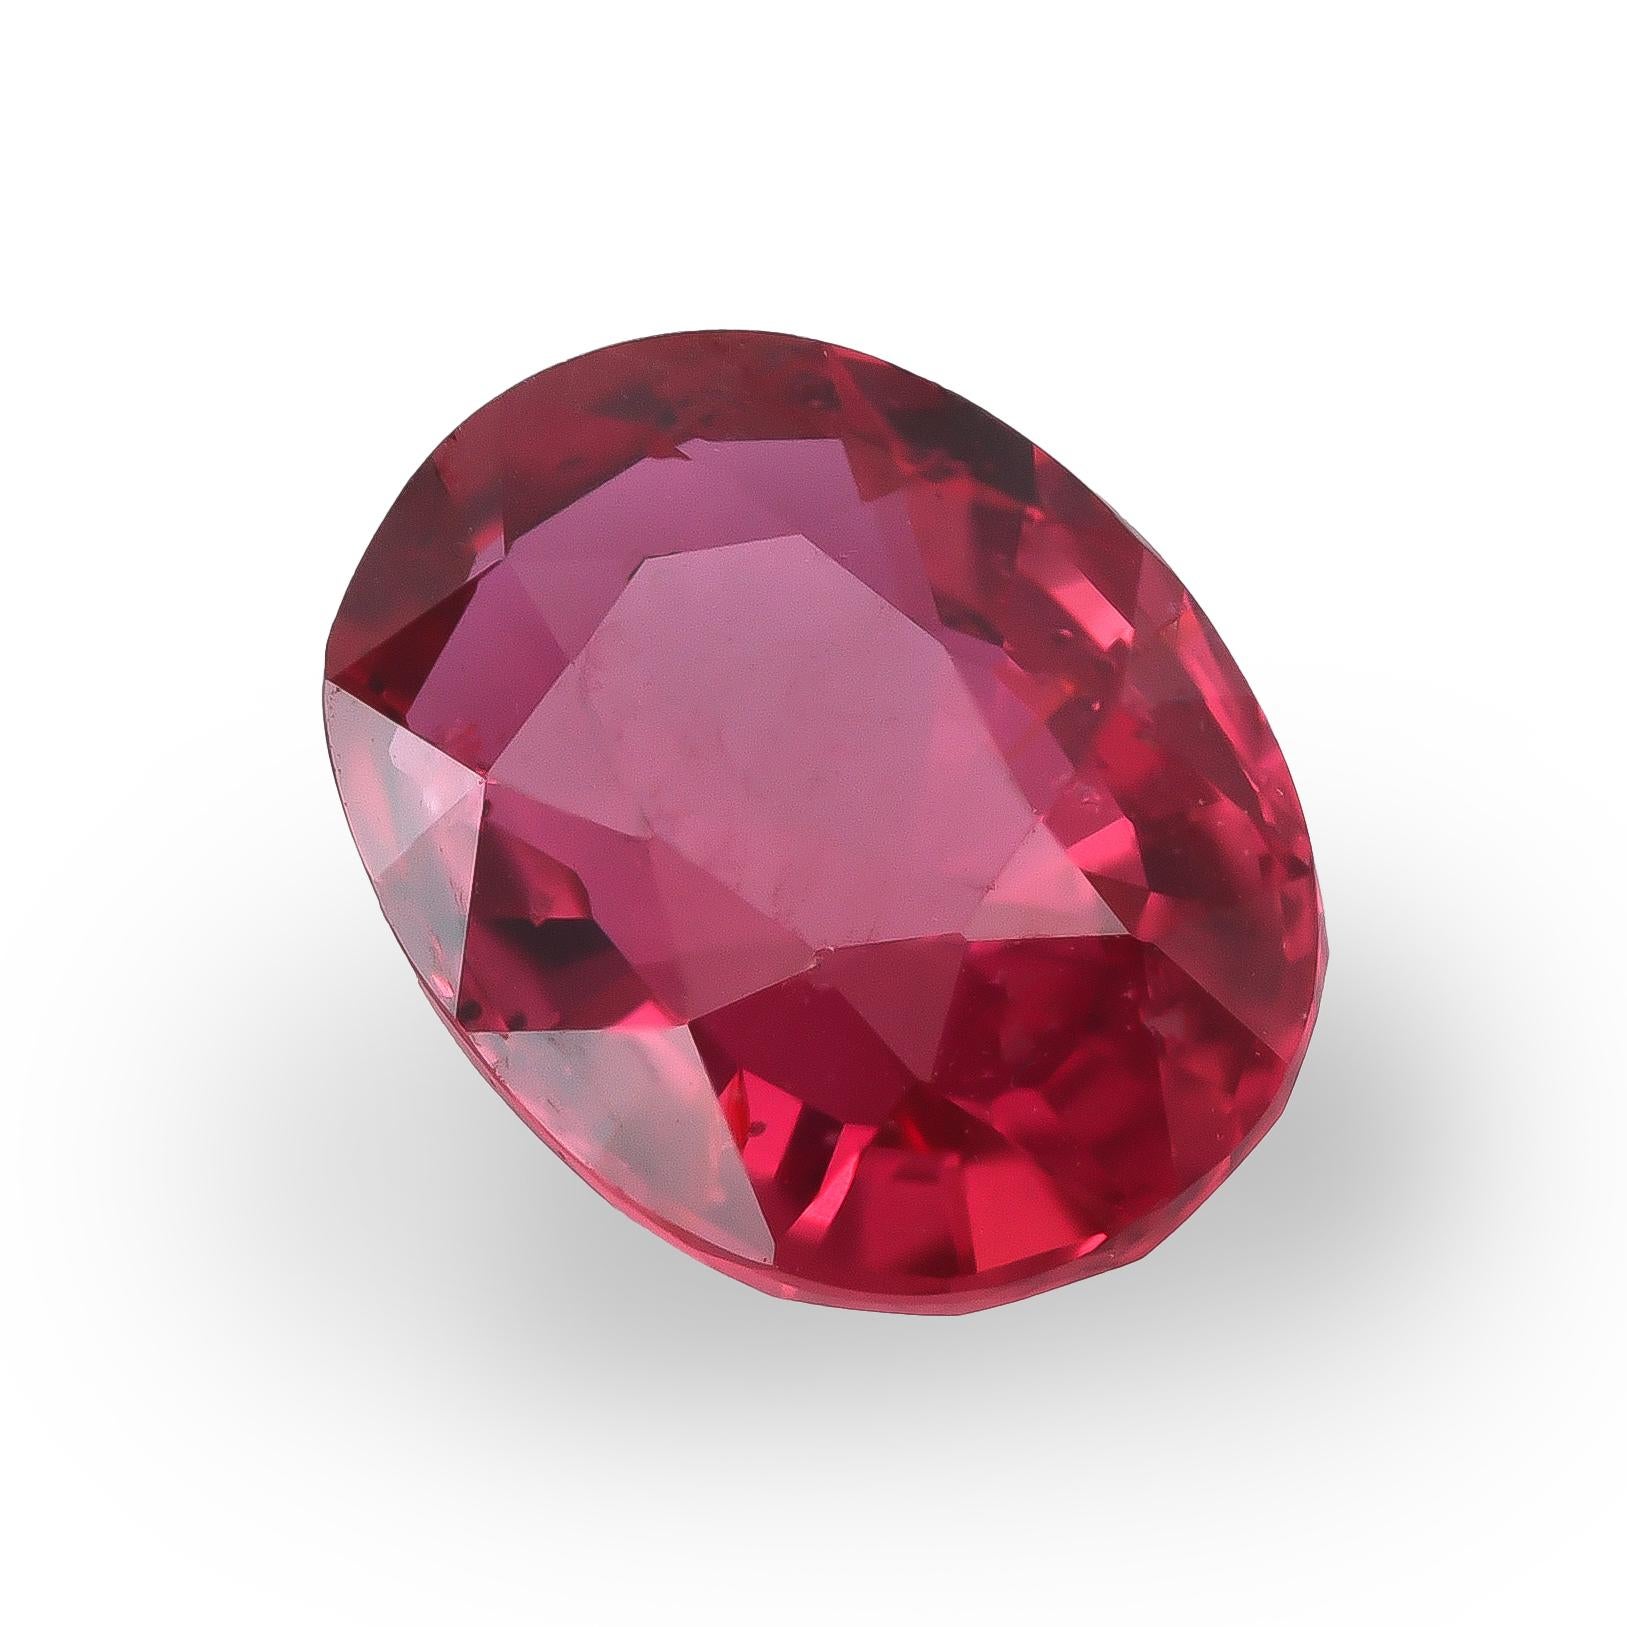 Mixed Cut GIA Certified 1.23 Carats Unheated Mozambique Ruby For Sale